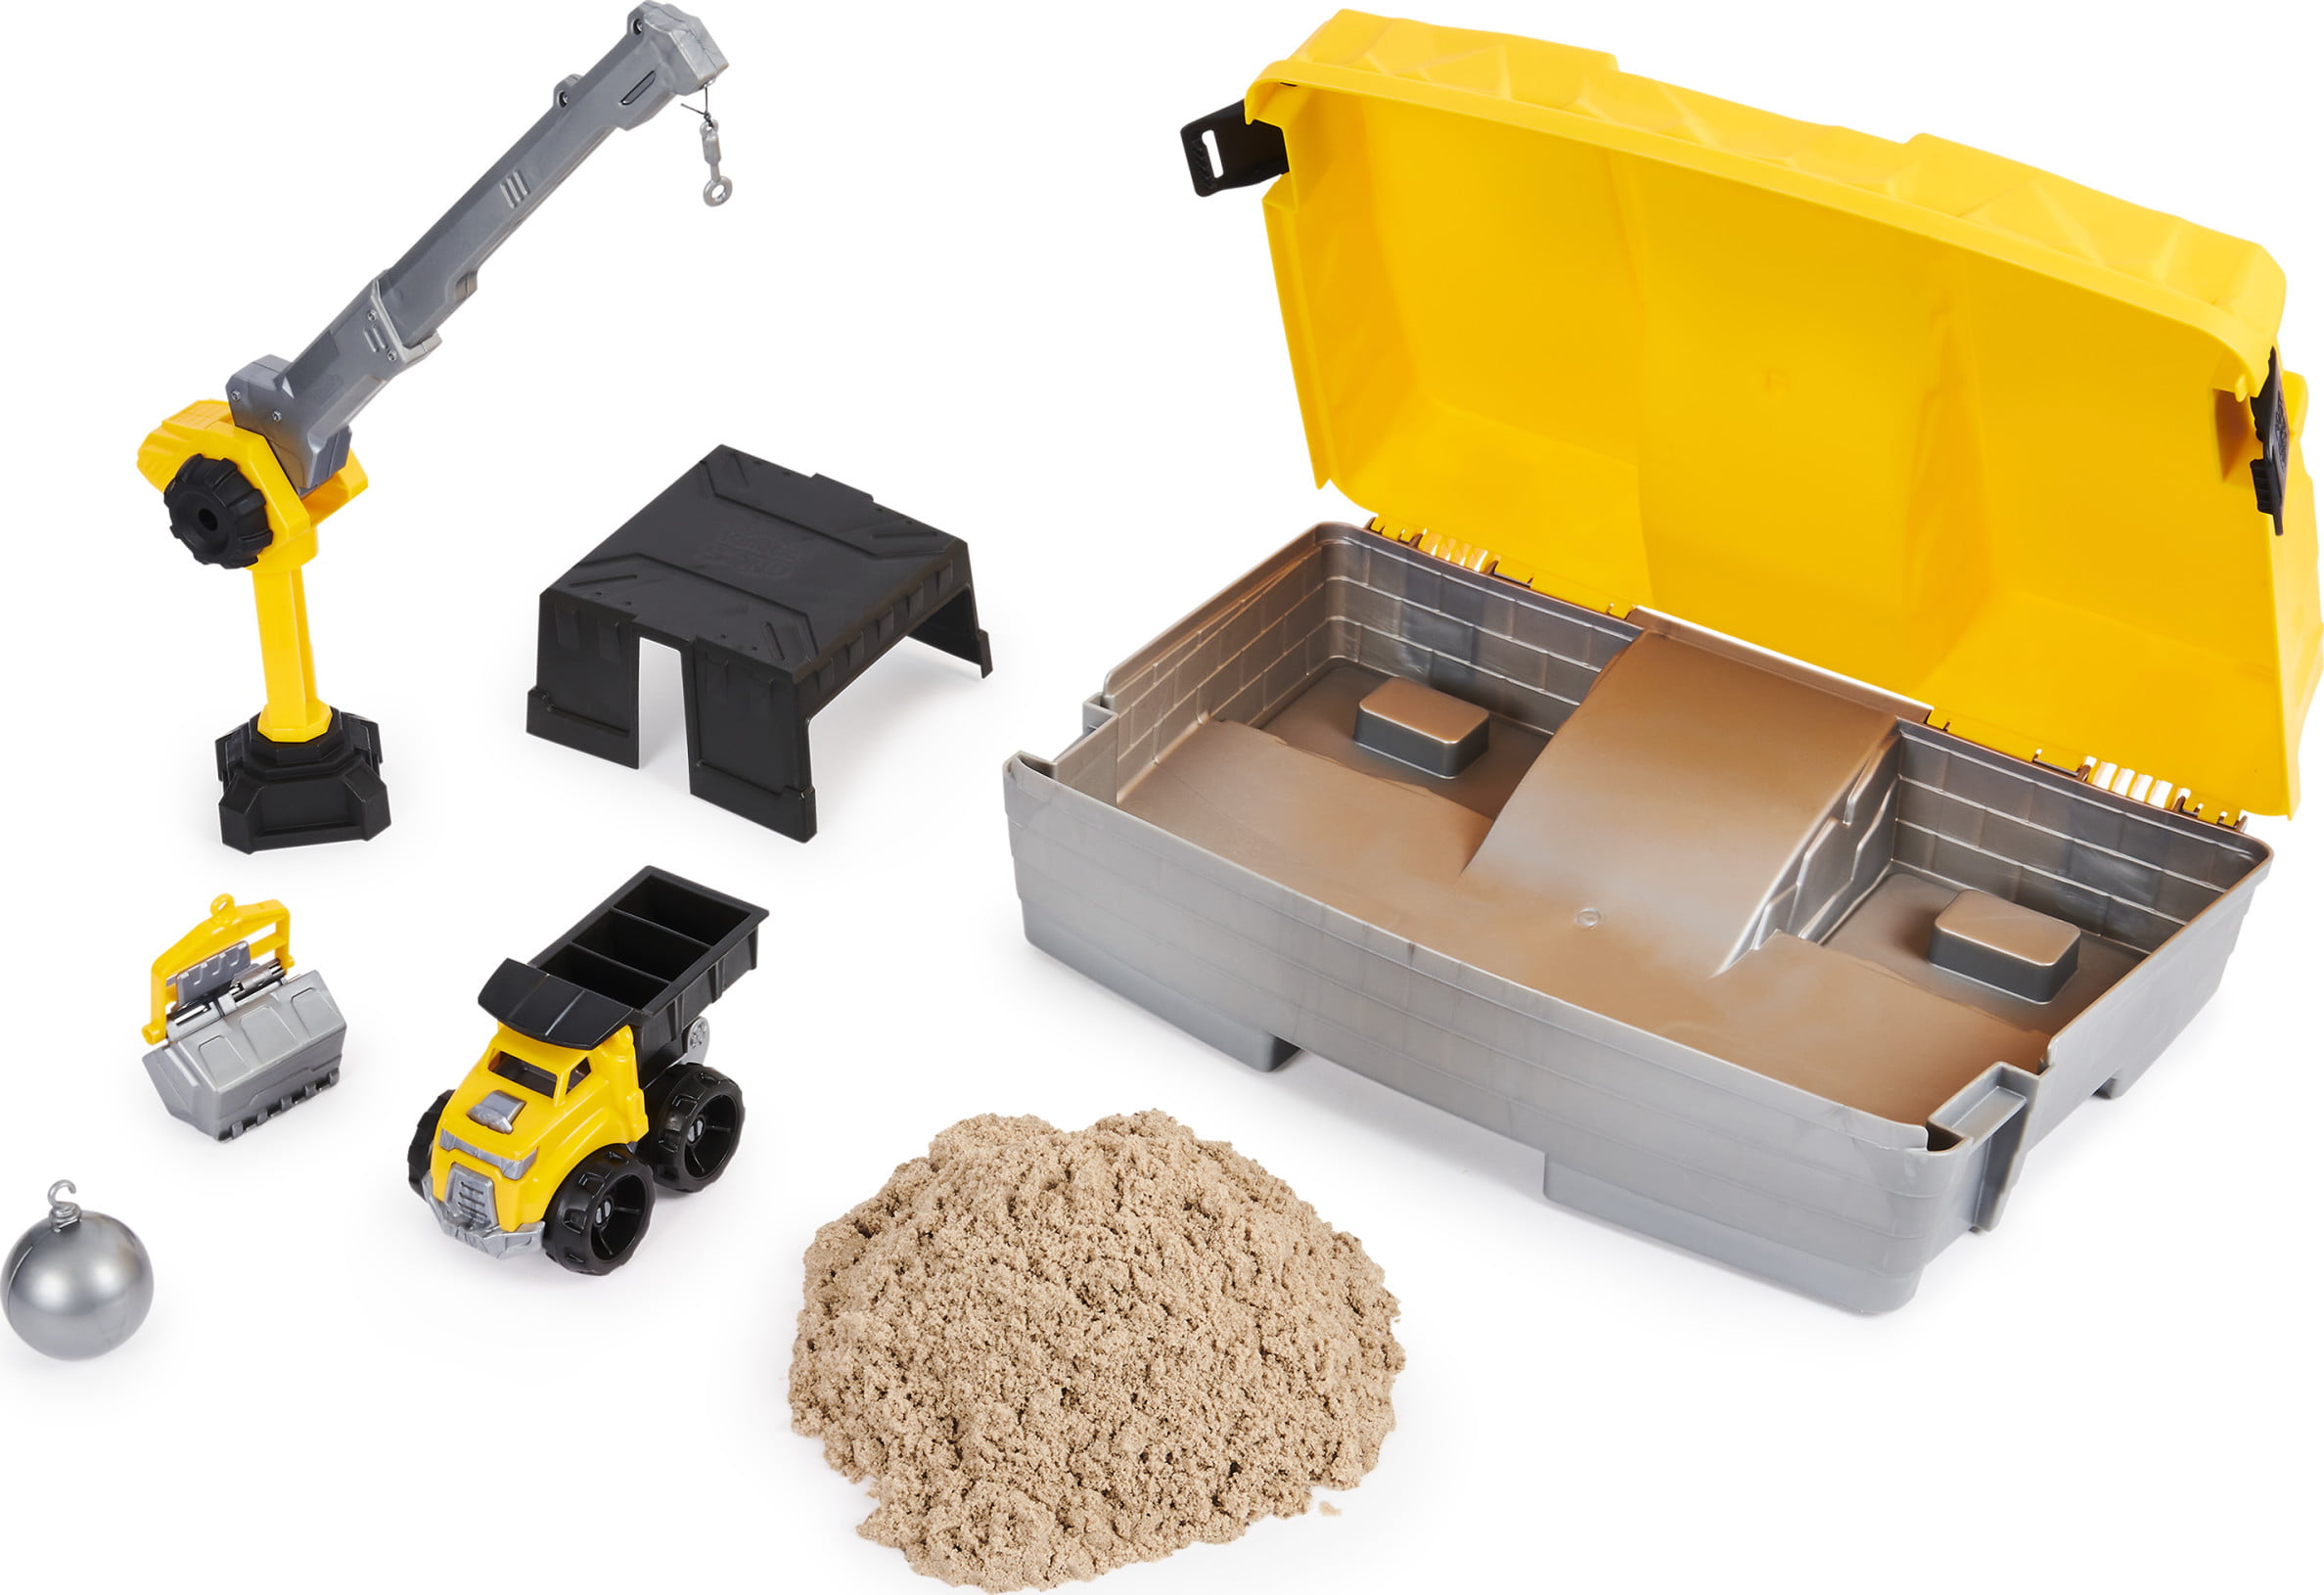 Kinetic Sand, Construction Site Folding Sandbox Playset with Vehicle and  2lbs Kinetic Sand, for Kids Aged 3 and up - Walmart.com